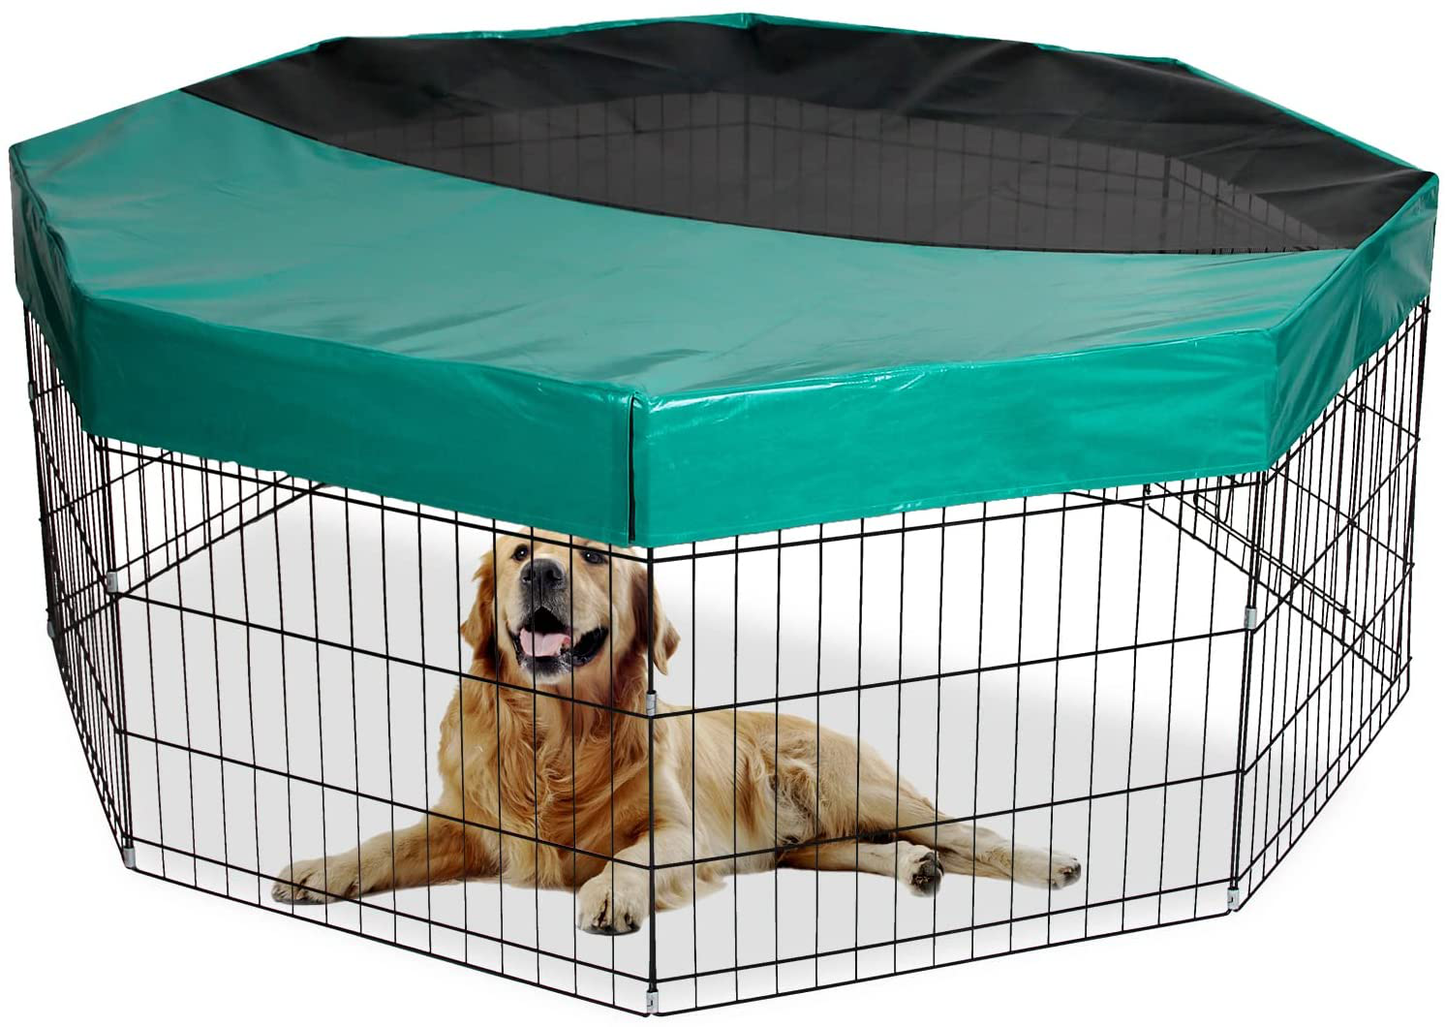 GORUTIN Dog Playpen Cover, Pet Playpen Mesh Top Cover Protect Dog from Sun/Rain Prevent Escape, Dog Pen Cover Shaded Area Indoor Outdoor Fits 24 Inch 8 Panels Playpen (Sell Top Cover Only!) Animals & Pet Supplies > Pet Supplies > Dog Supplies > Dog Kennels & Runs GORUTIN Dark Green  